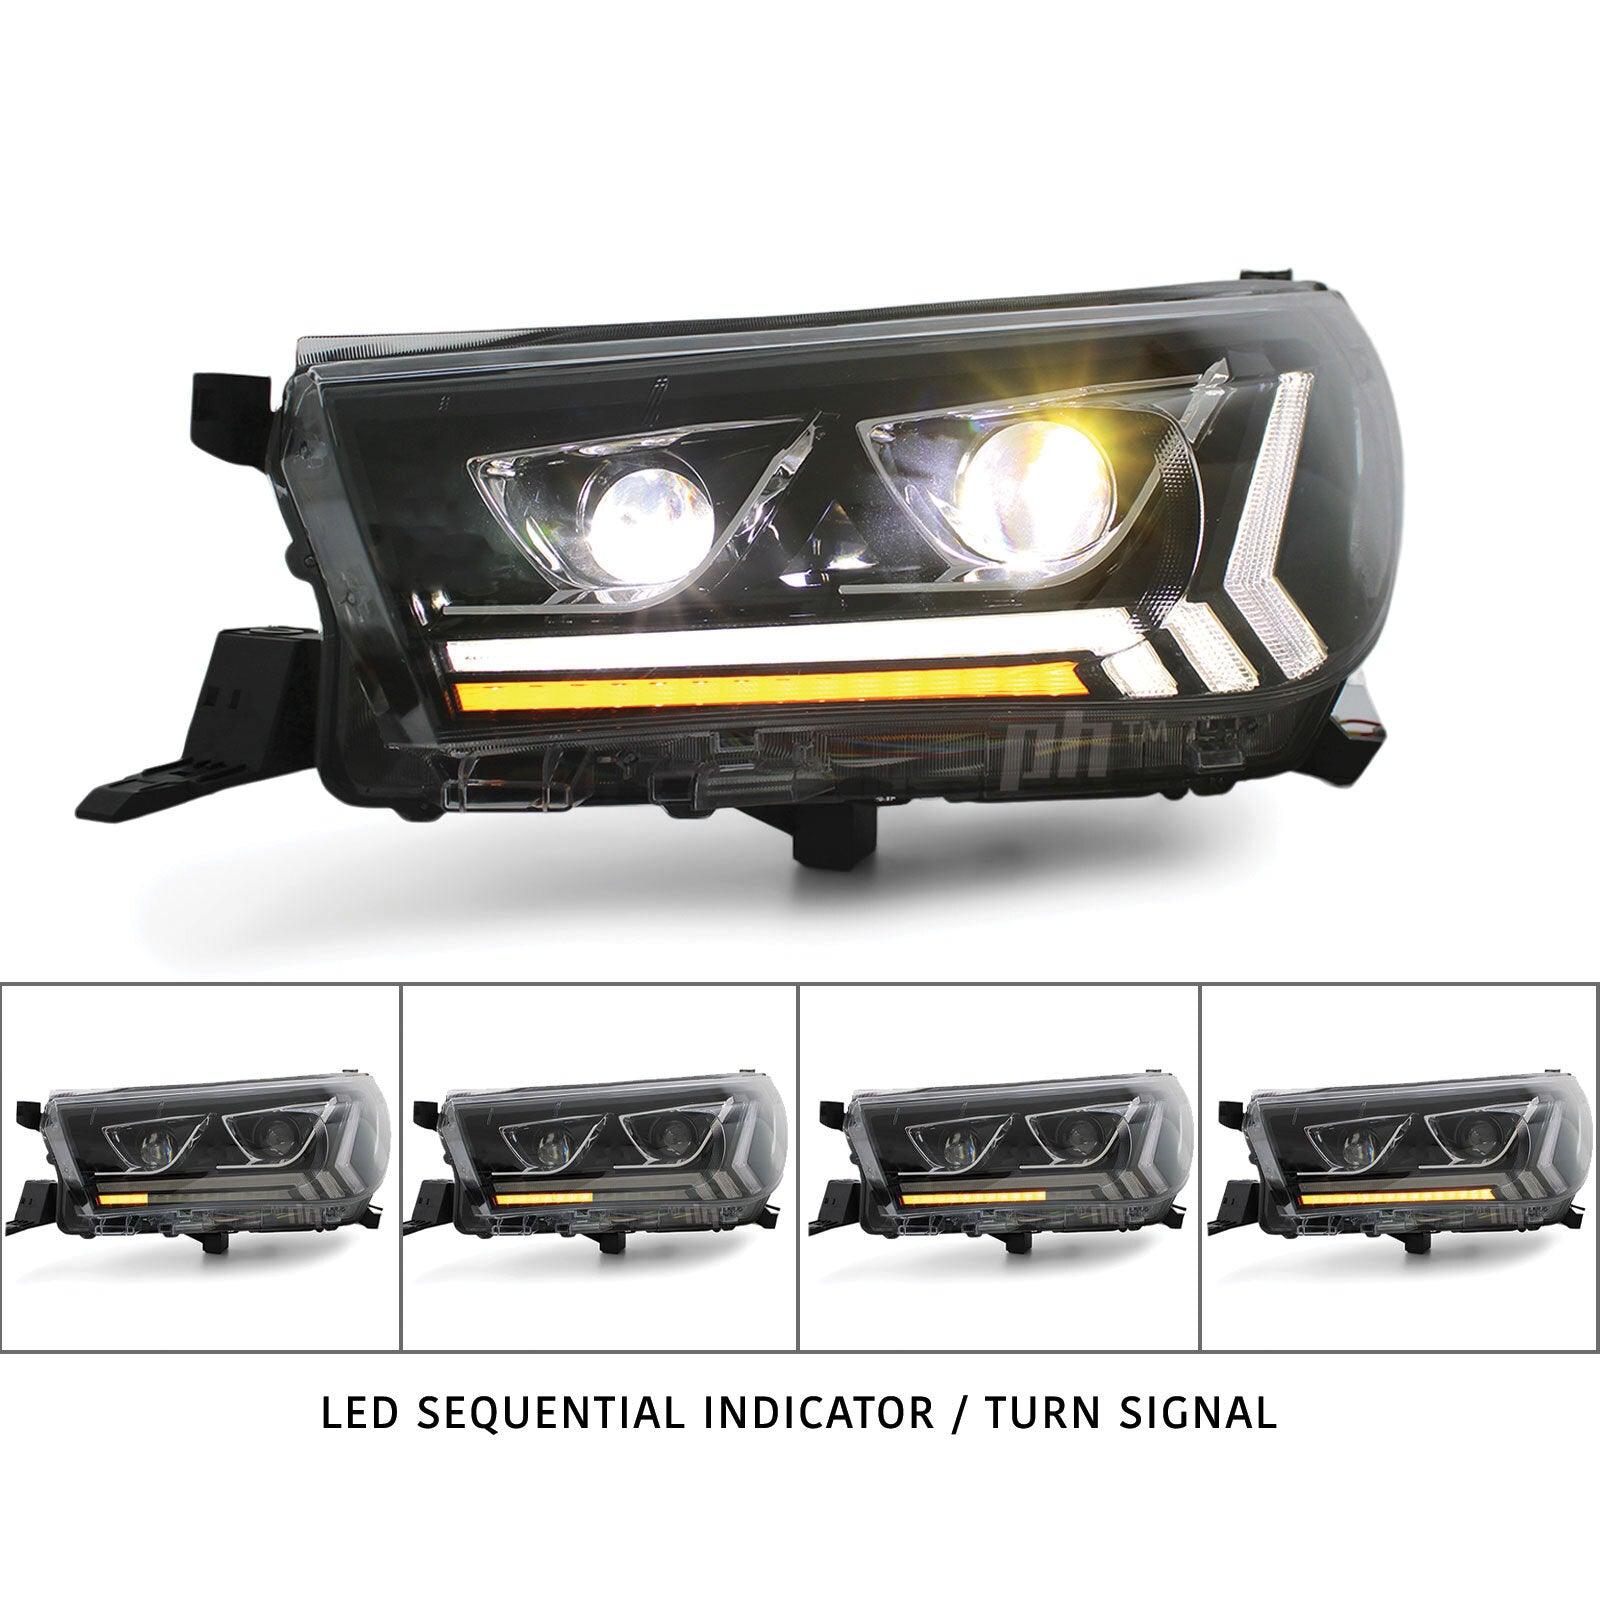 Panel House - Headlights LED DRL Dual Projector Sequential fits Toyota Hilux N80 2015 - 2020 - 4X4OC™ | 4x4 Offroad Centre